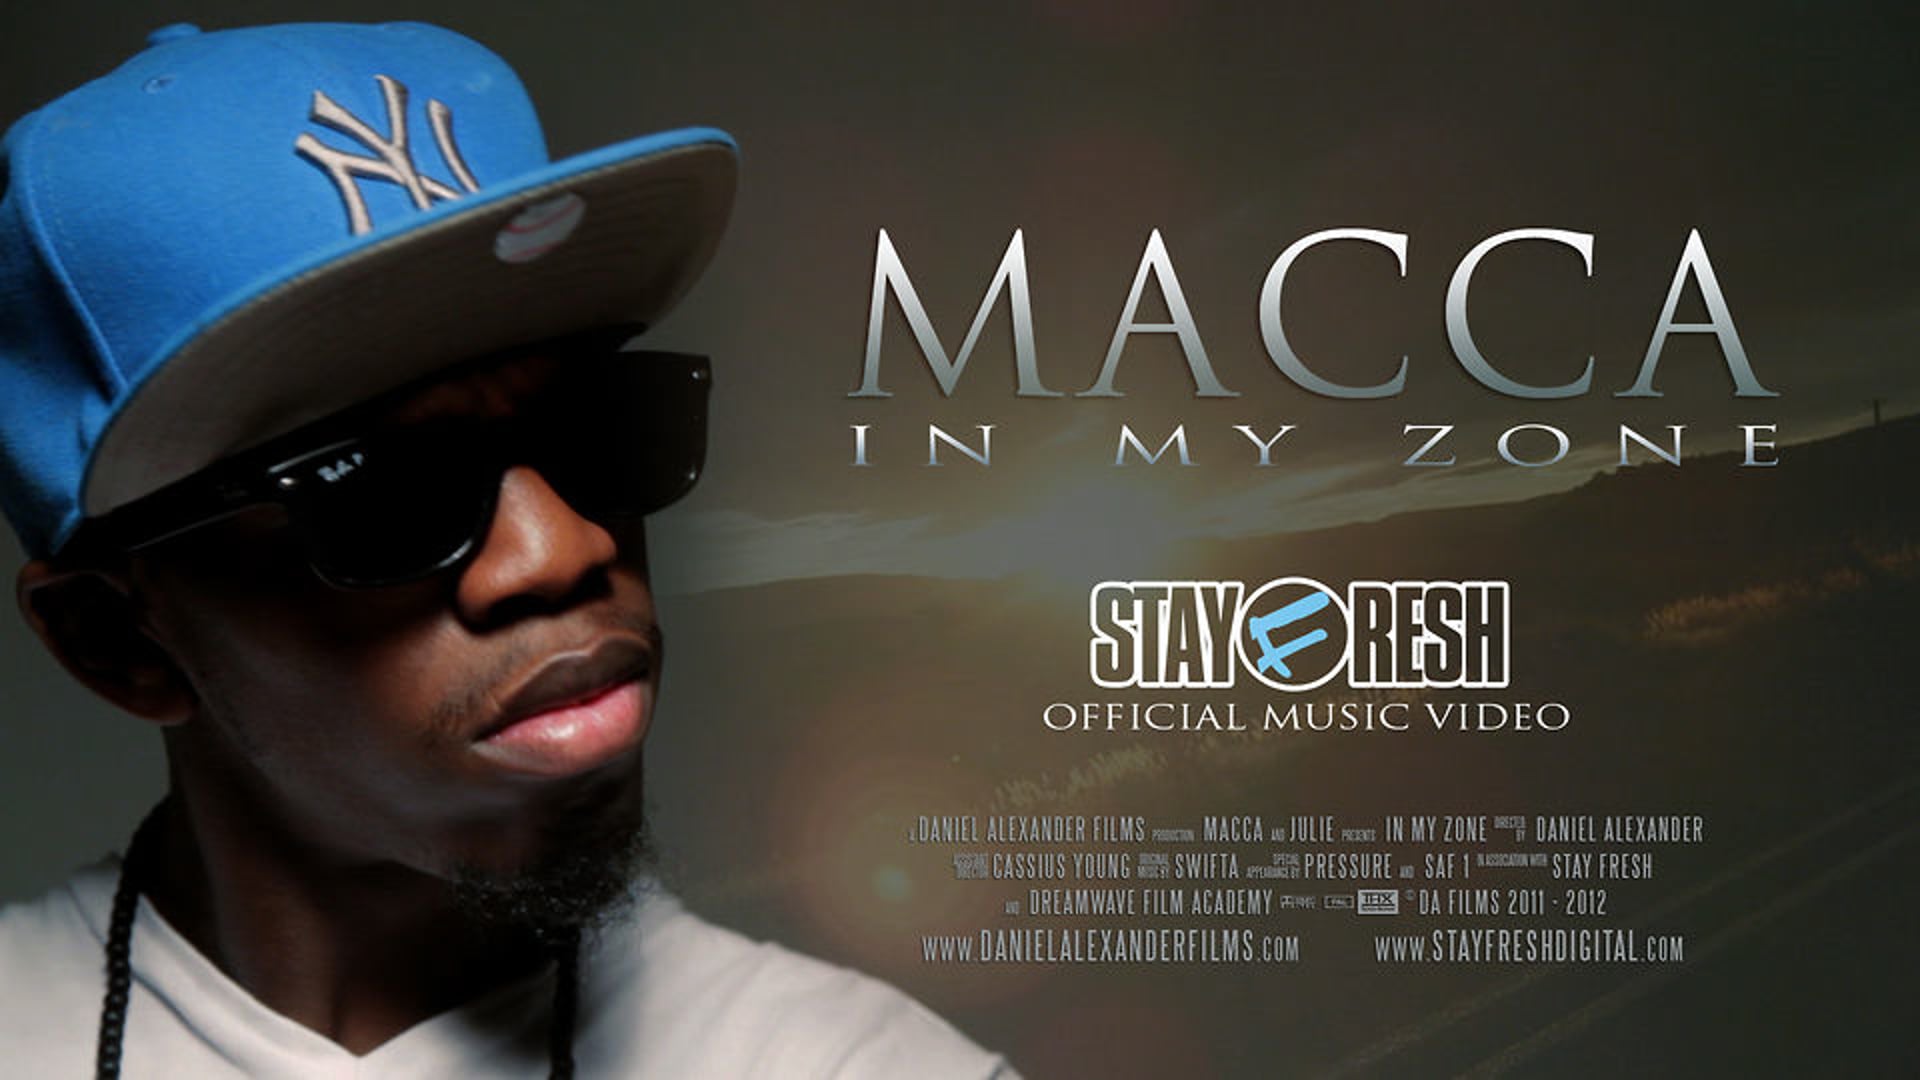 Macca "IN MY ZONE" Official Music Video